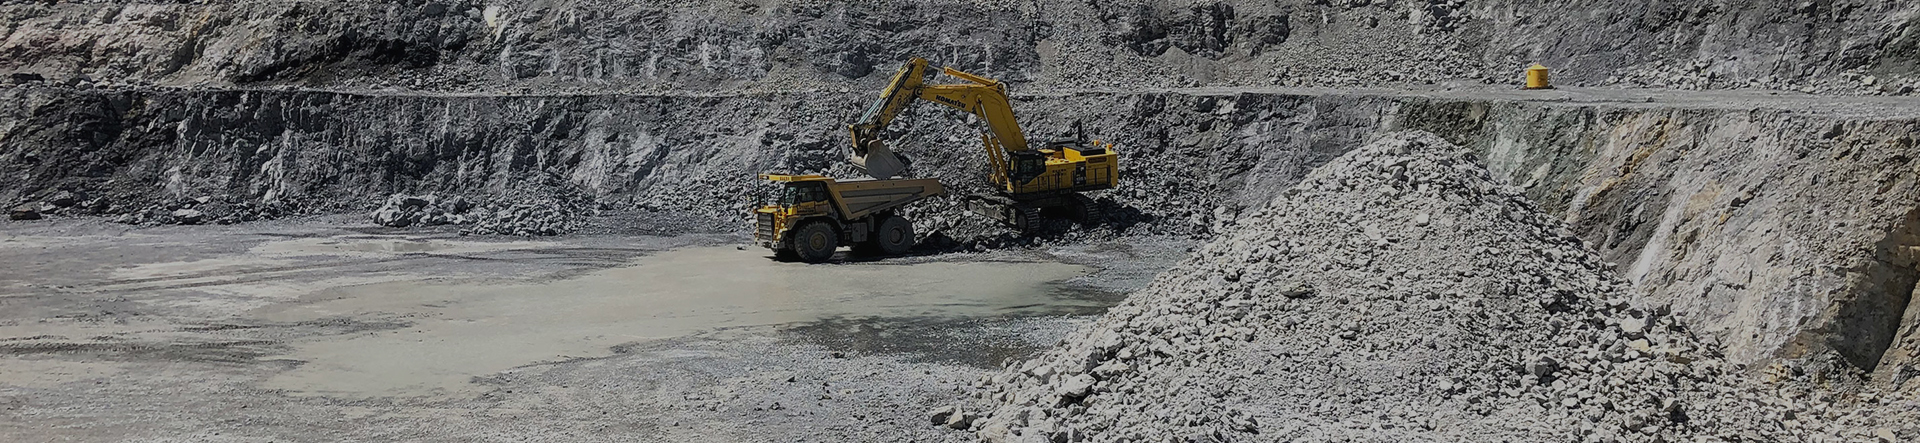 mining project working site